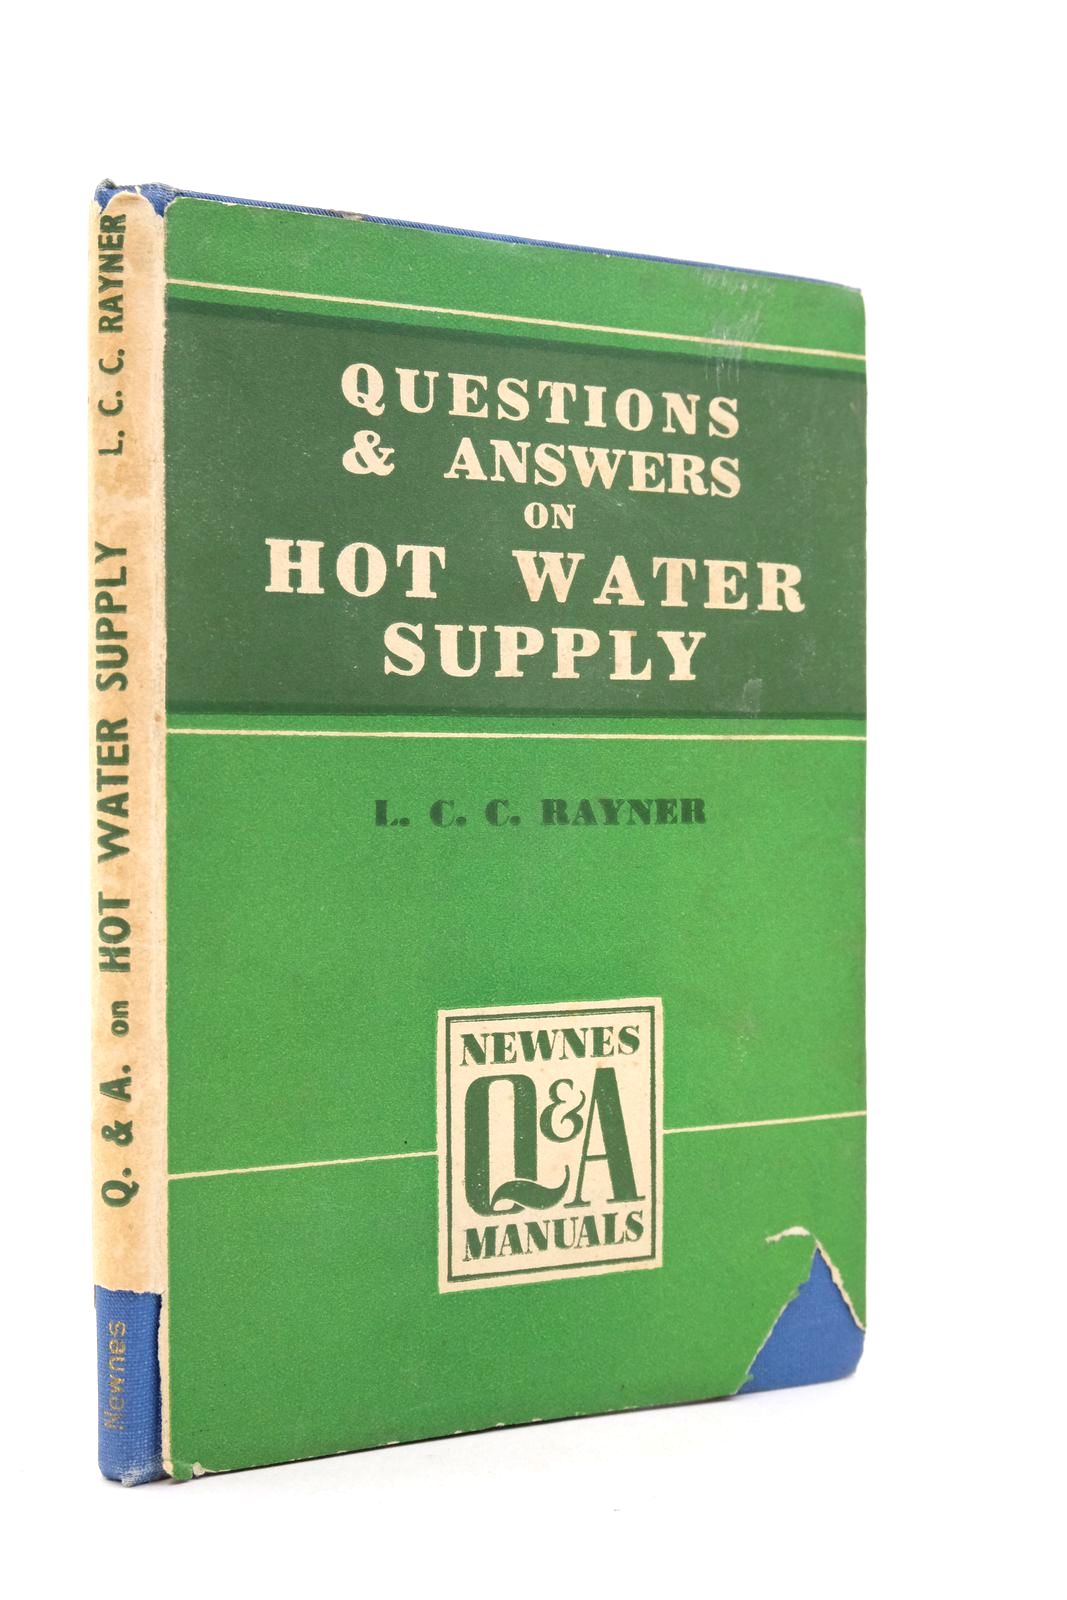 Photo of QUESTIONS AND ANSWERS ON HOT WATER SUPPLY written by Rayner, L.C.C. published by George Newnes Limited (STOCK CODE: 2140299)  for sale by Stella & Rose's Books